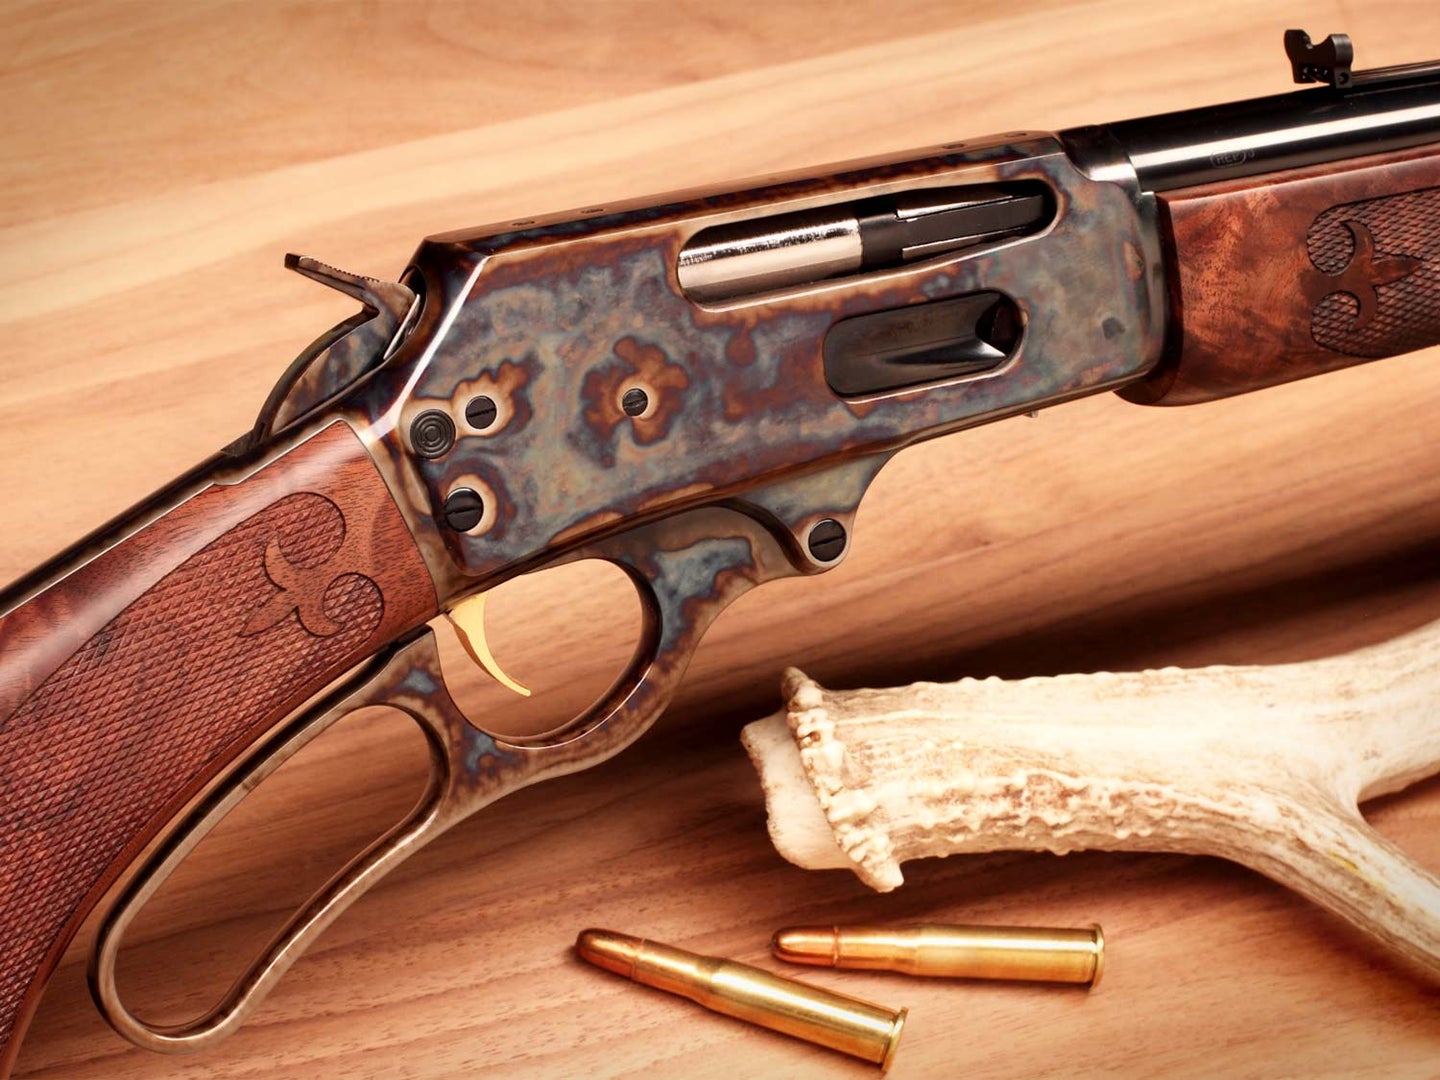 A close up image of a lever-action rifle on a wooden floor.